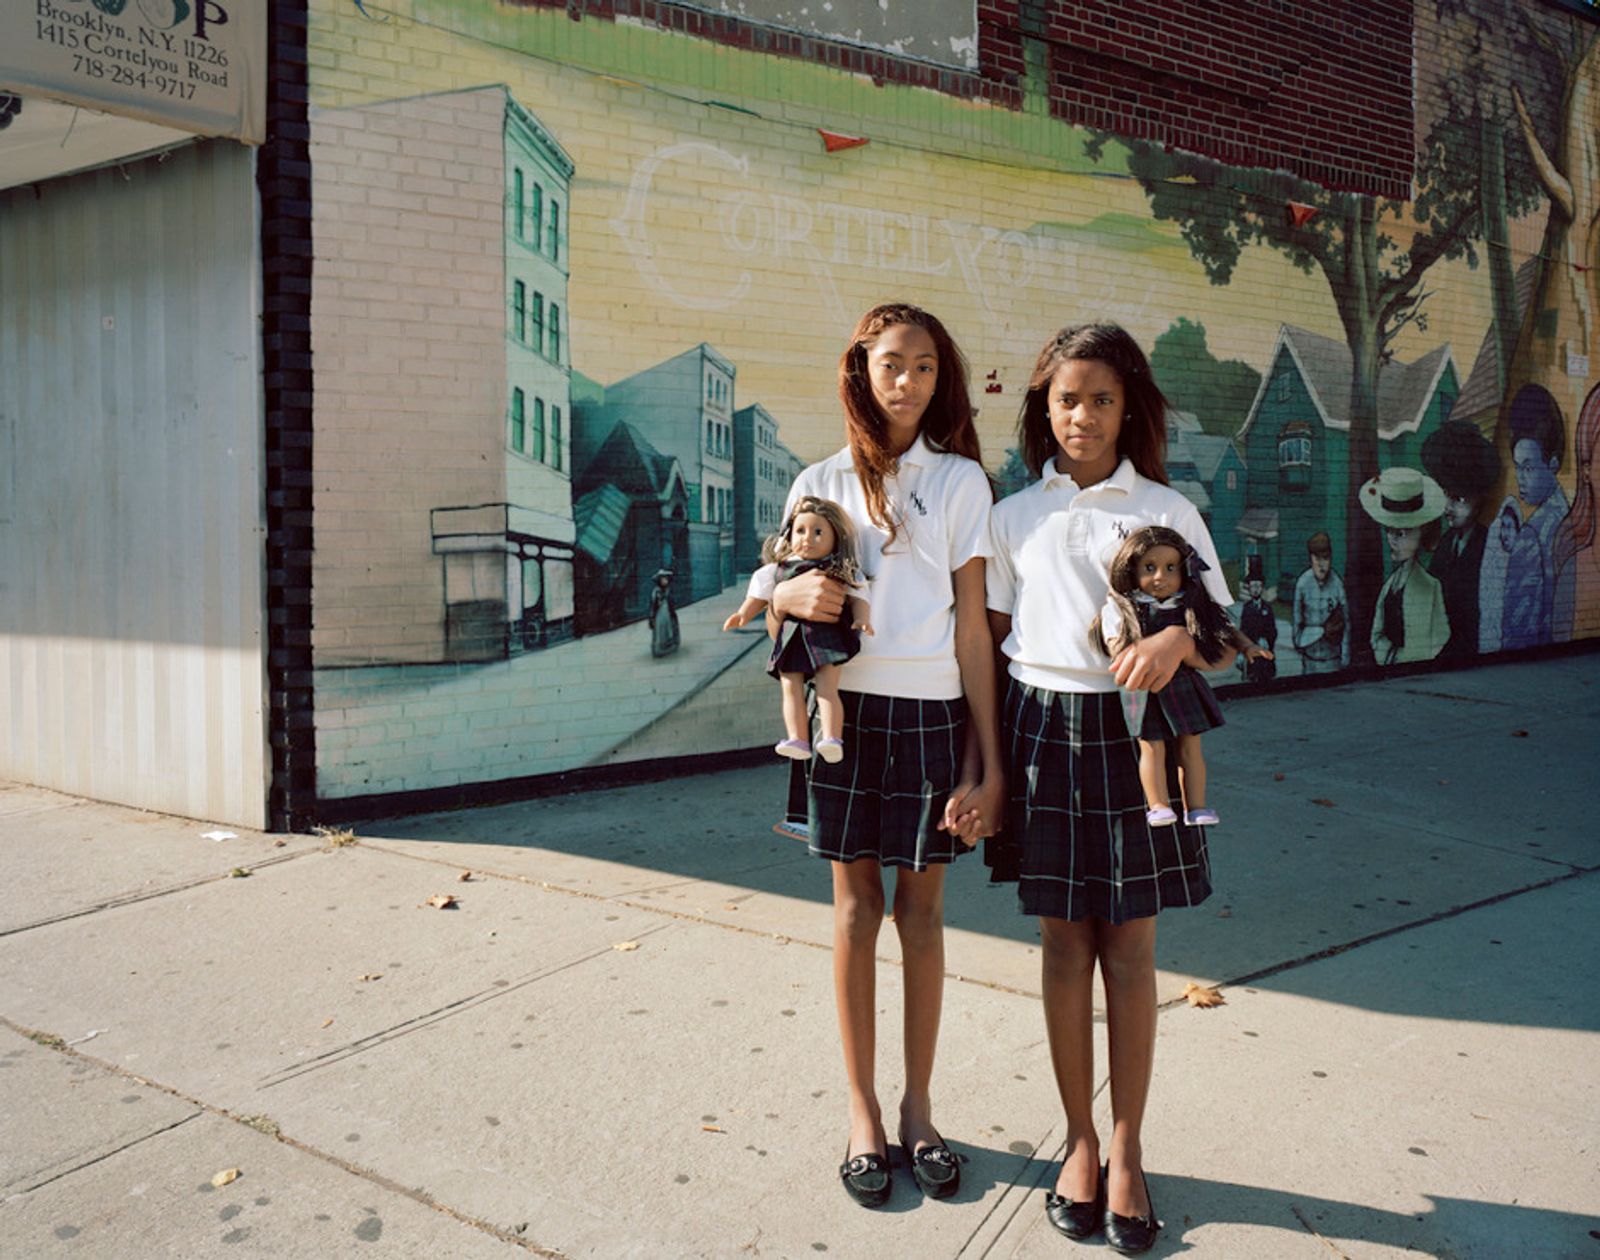 © Ilona Szwarc - Image from the American Girls photography project